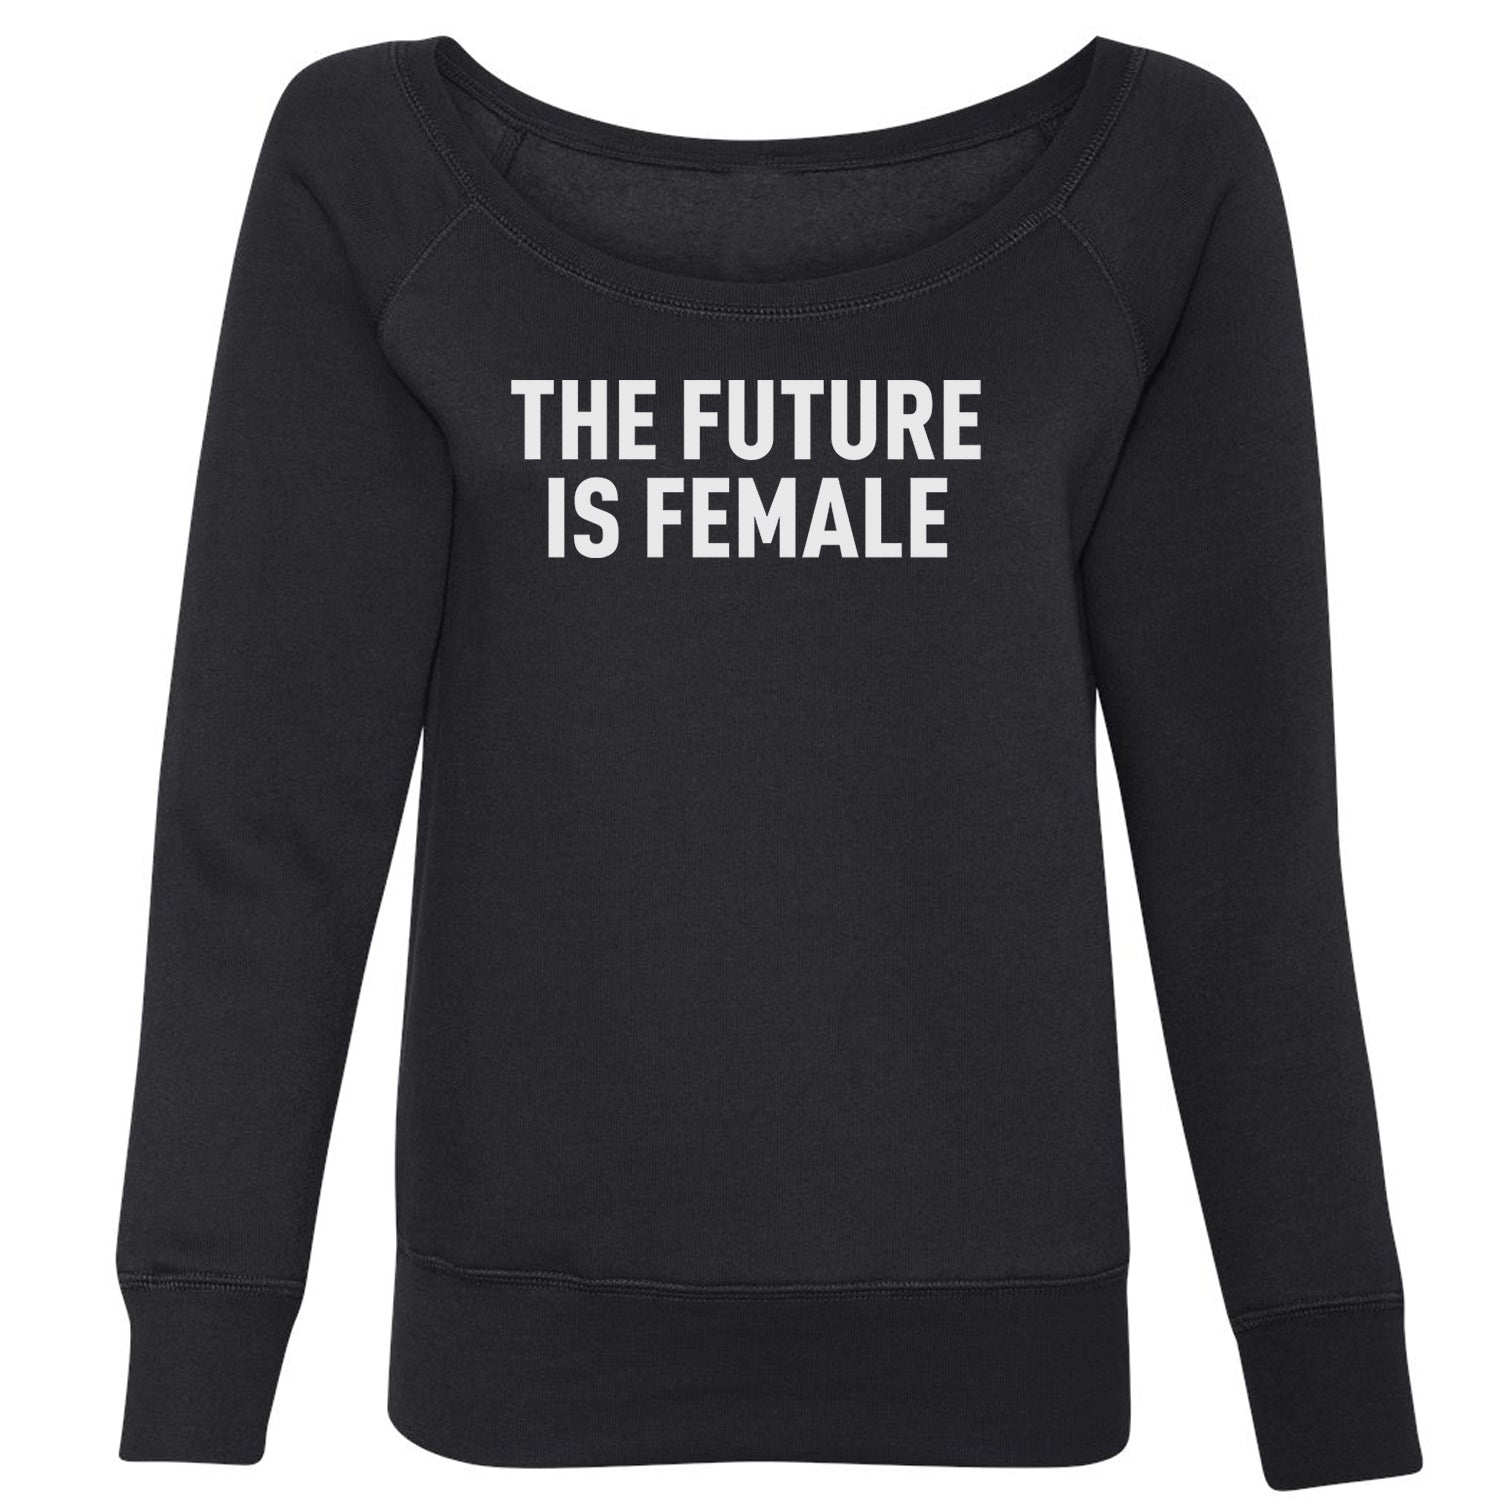 The Future Is Female Feminism Slouchy Off Shoulder Oversized Sweatshirt female, feminism, feminist, femme, future, is, liberation, suffrage, the by Expression Tees